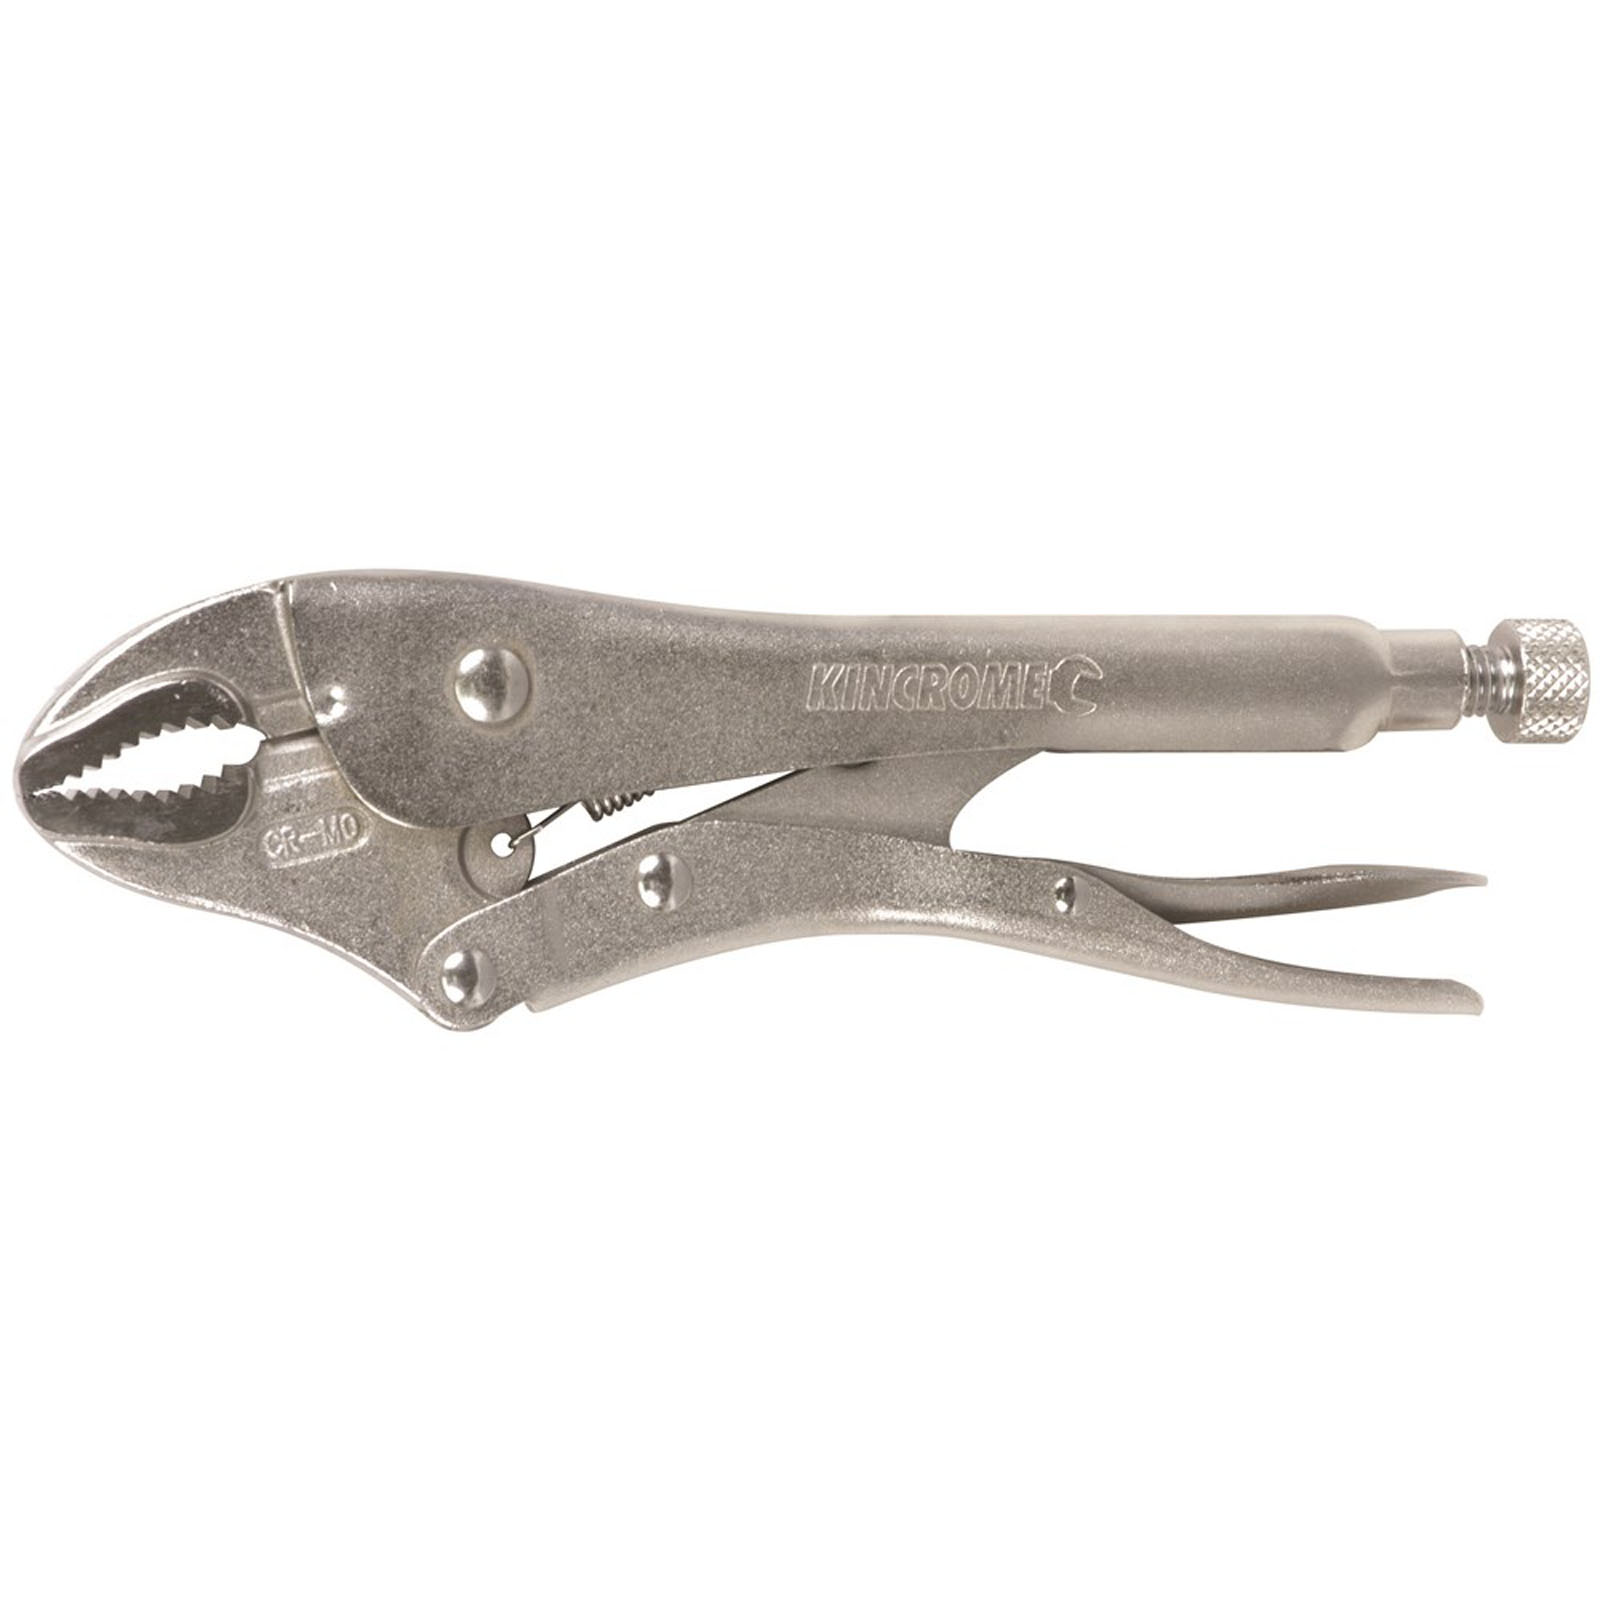 Locking Pliers Curved Jaw 175mm (7